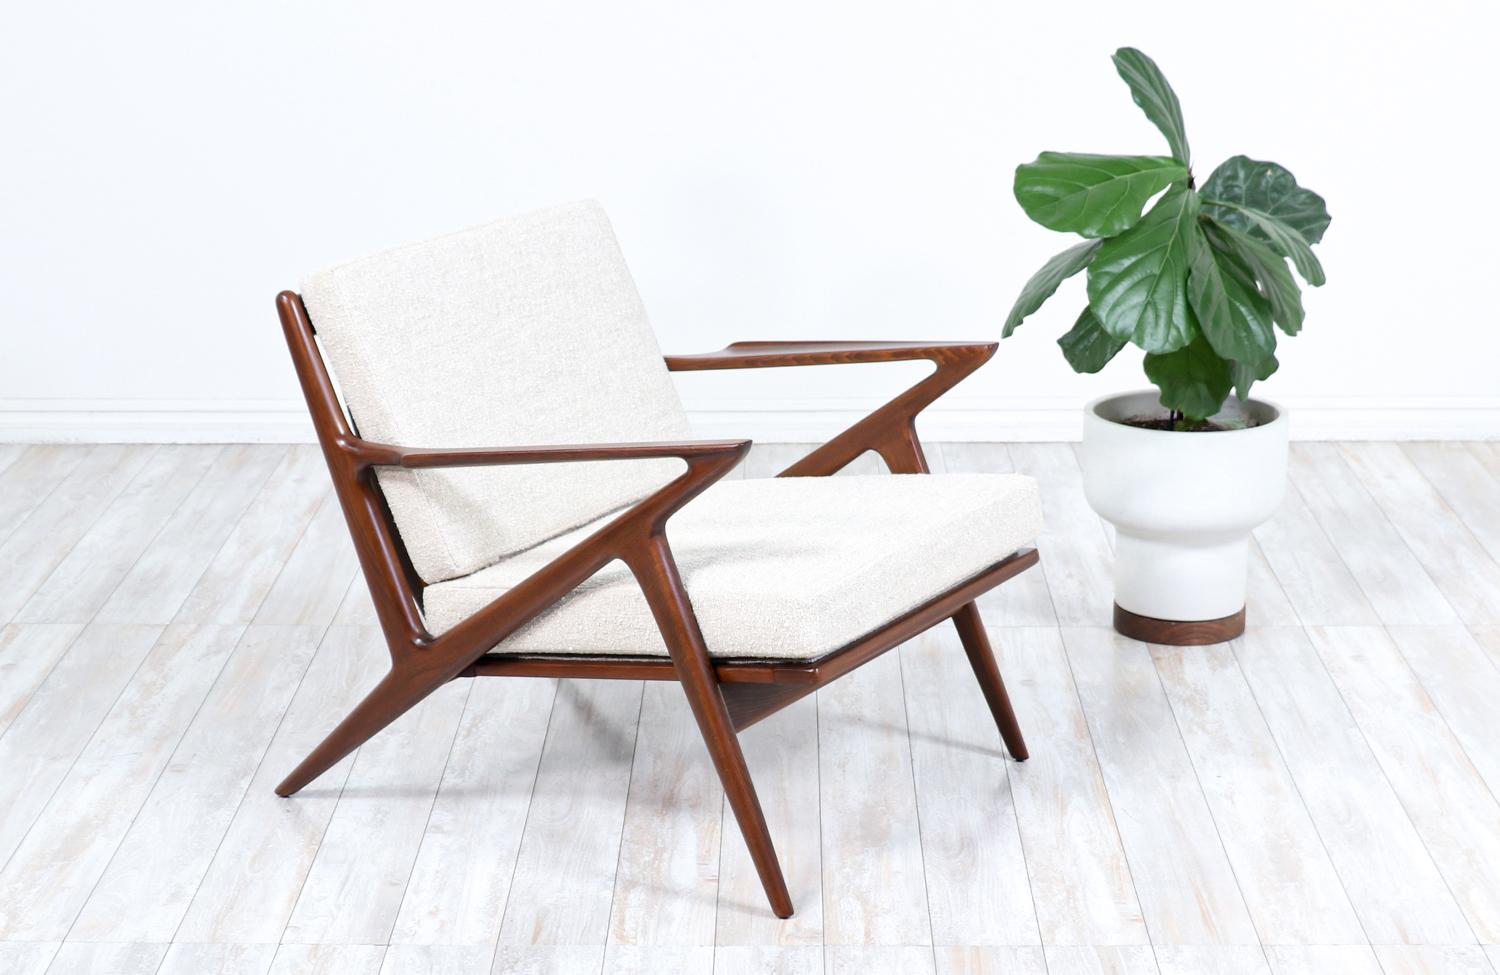 A classic lounge chair designed by Poul Jensen for Selig in Denmark circa 1950s. Known as the 'Z' lounge chair for its signature armrests that connect to the legs, which resembles the letter. This iconic chair features a solid walnut-stained